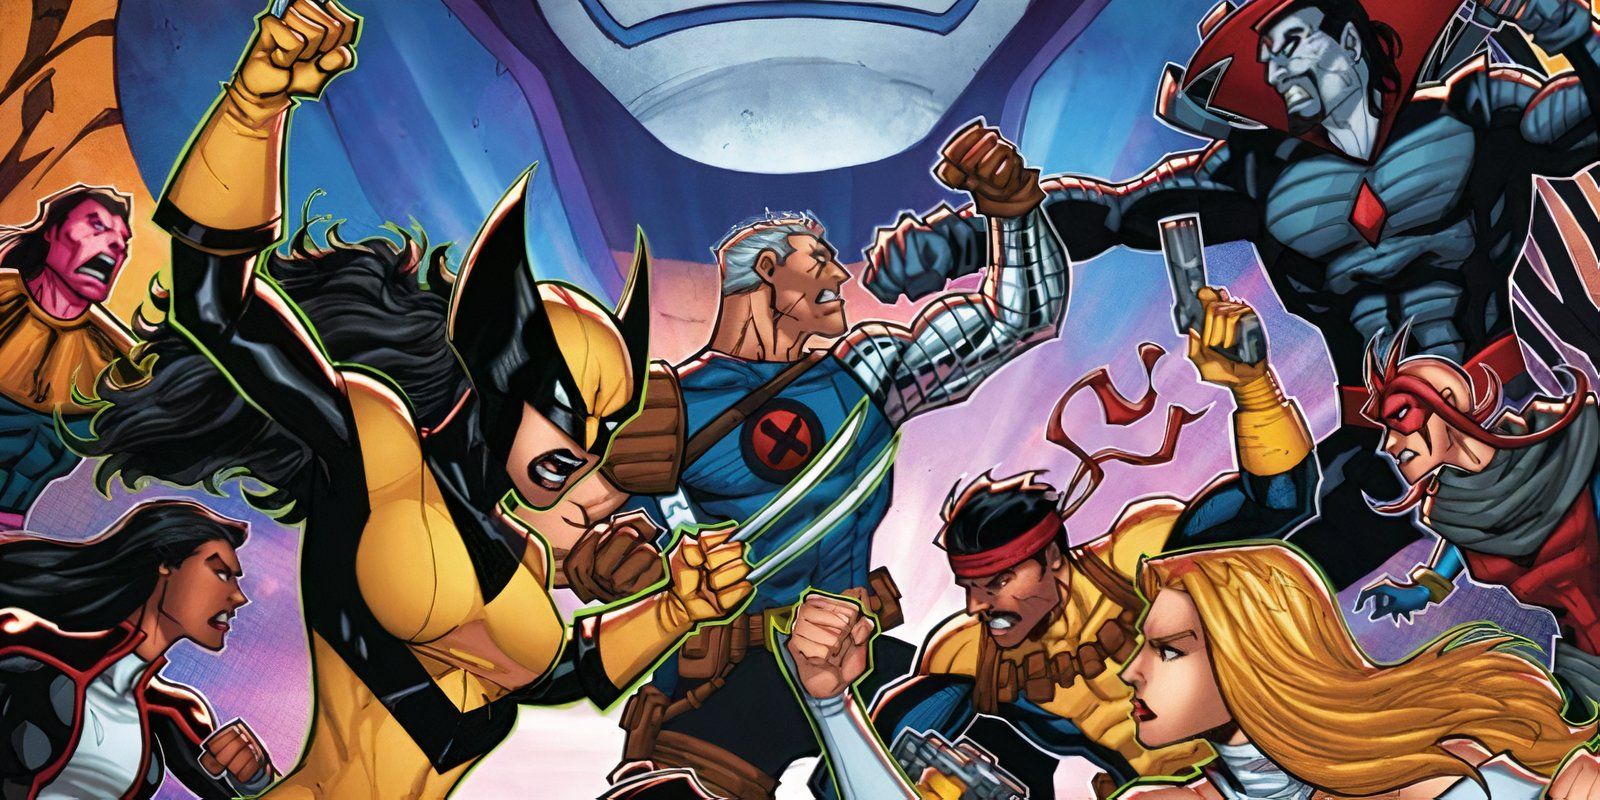 Exodus, Penance, Wolverine, Cable, Forge, Emma Frost, Mr. Sinister & more in a battle royale.